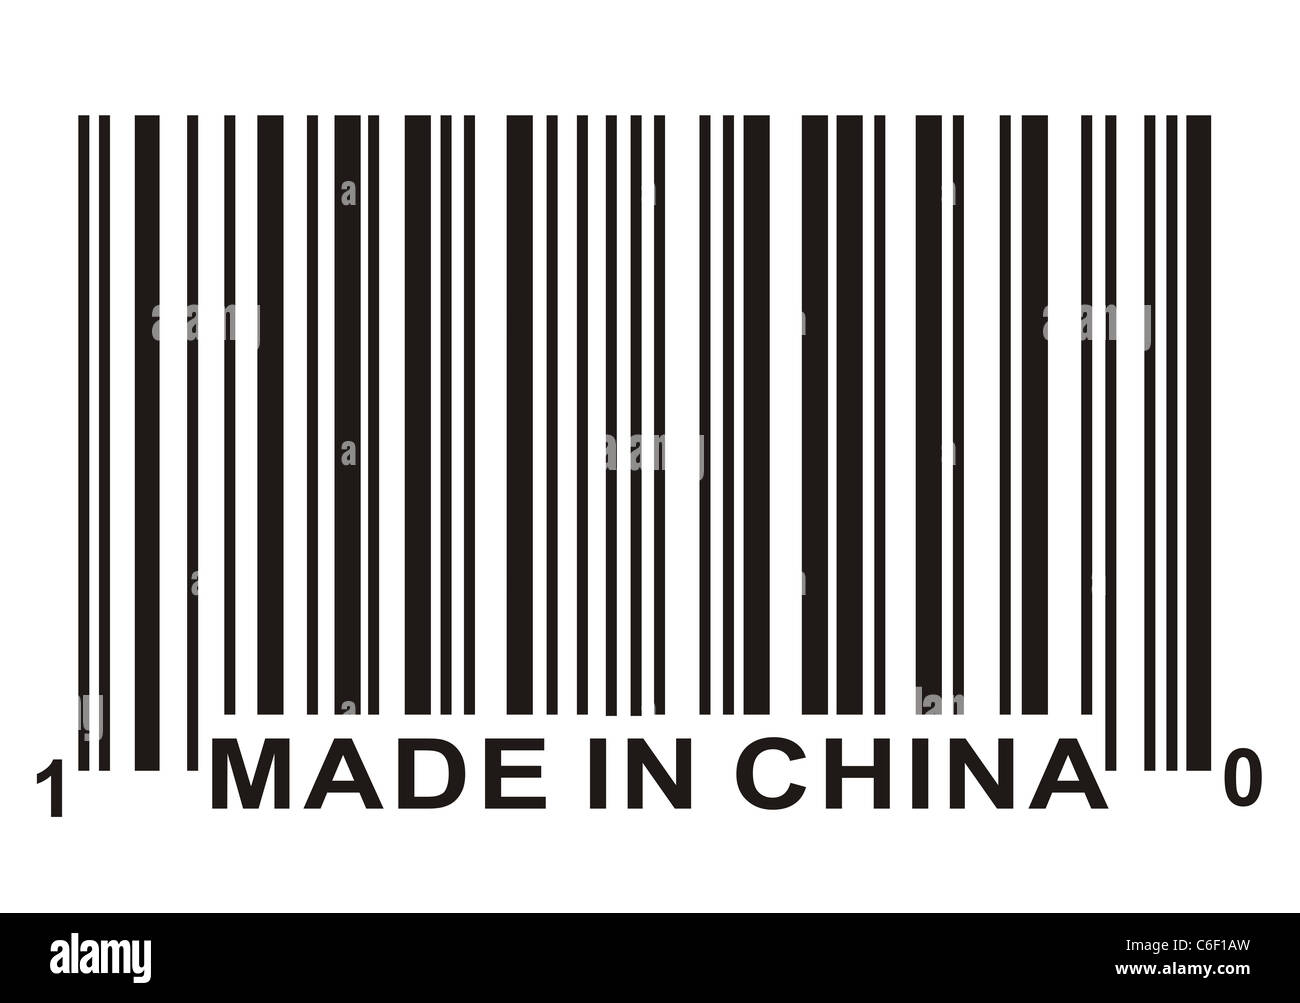 Made in China and barcode, business concept Stock Photo